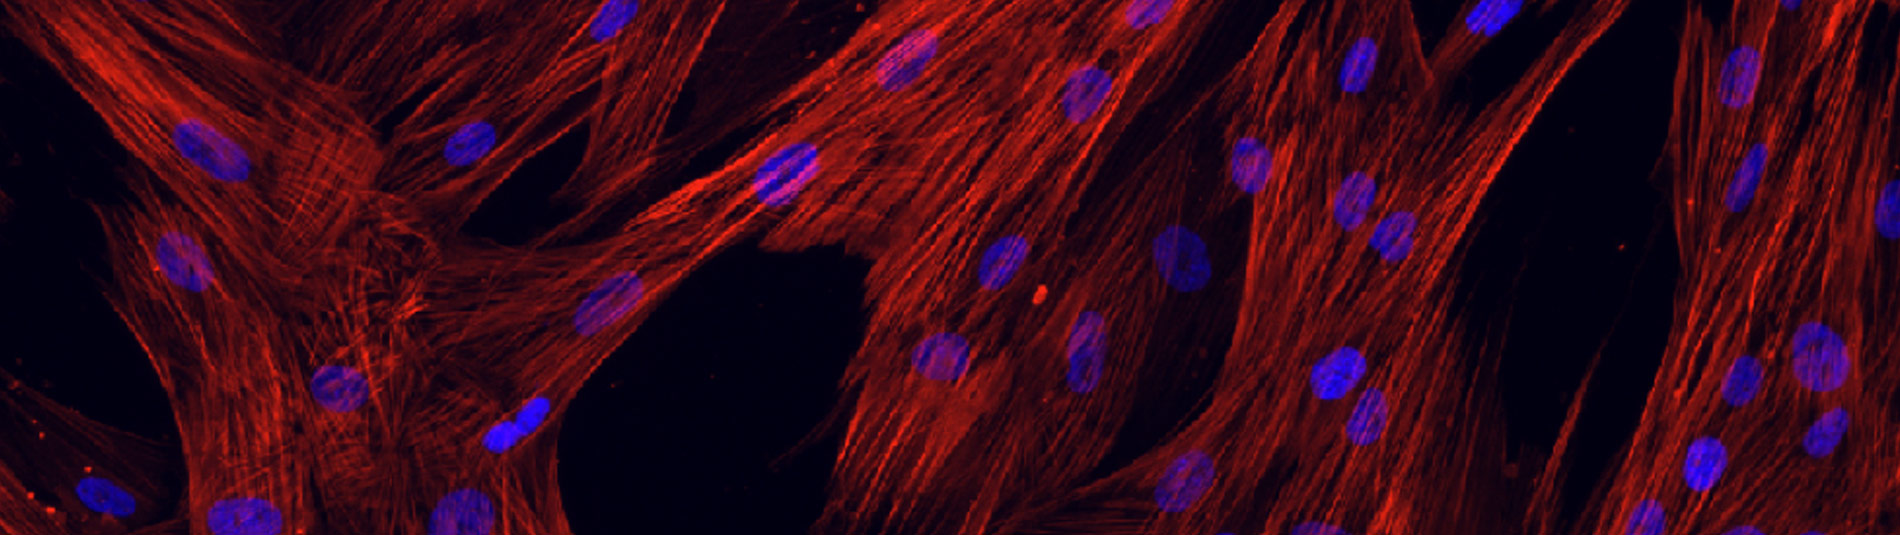 Myofibroblasts stained for α-smooth muscle actin (red) with immunofluorescence staining